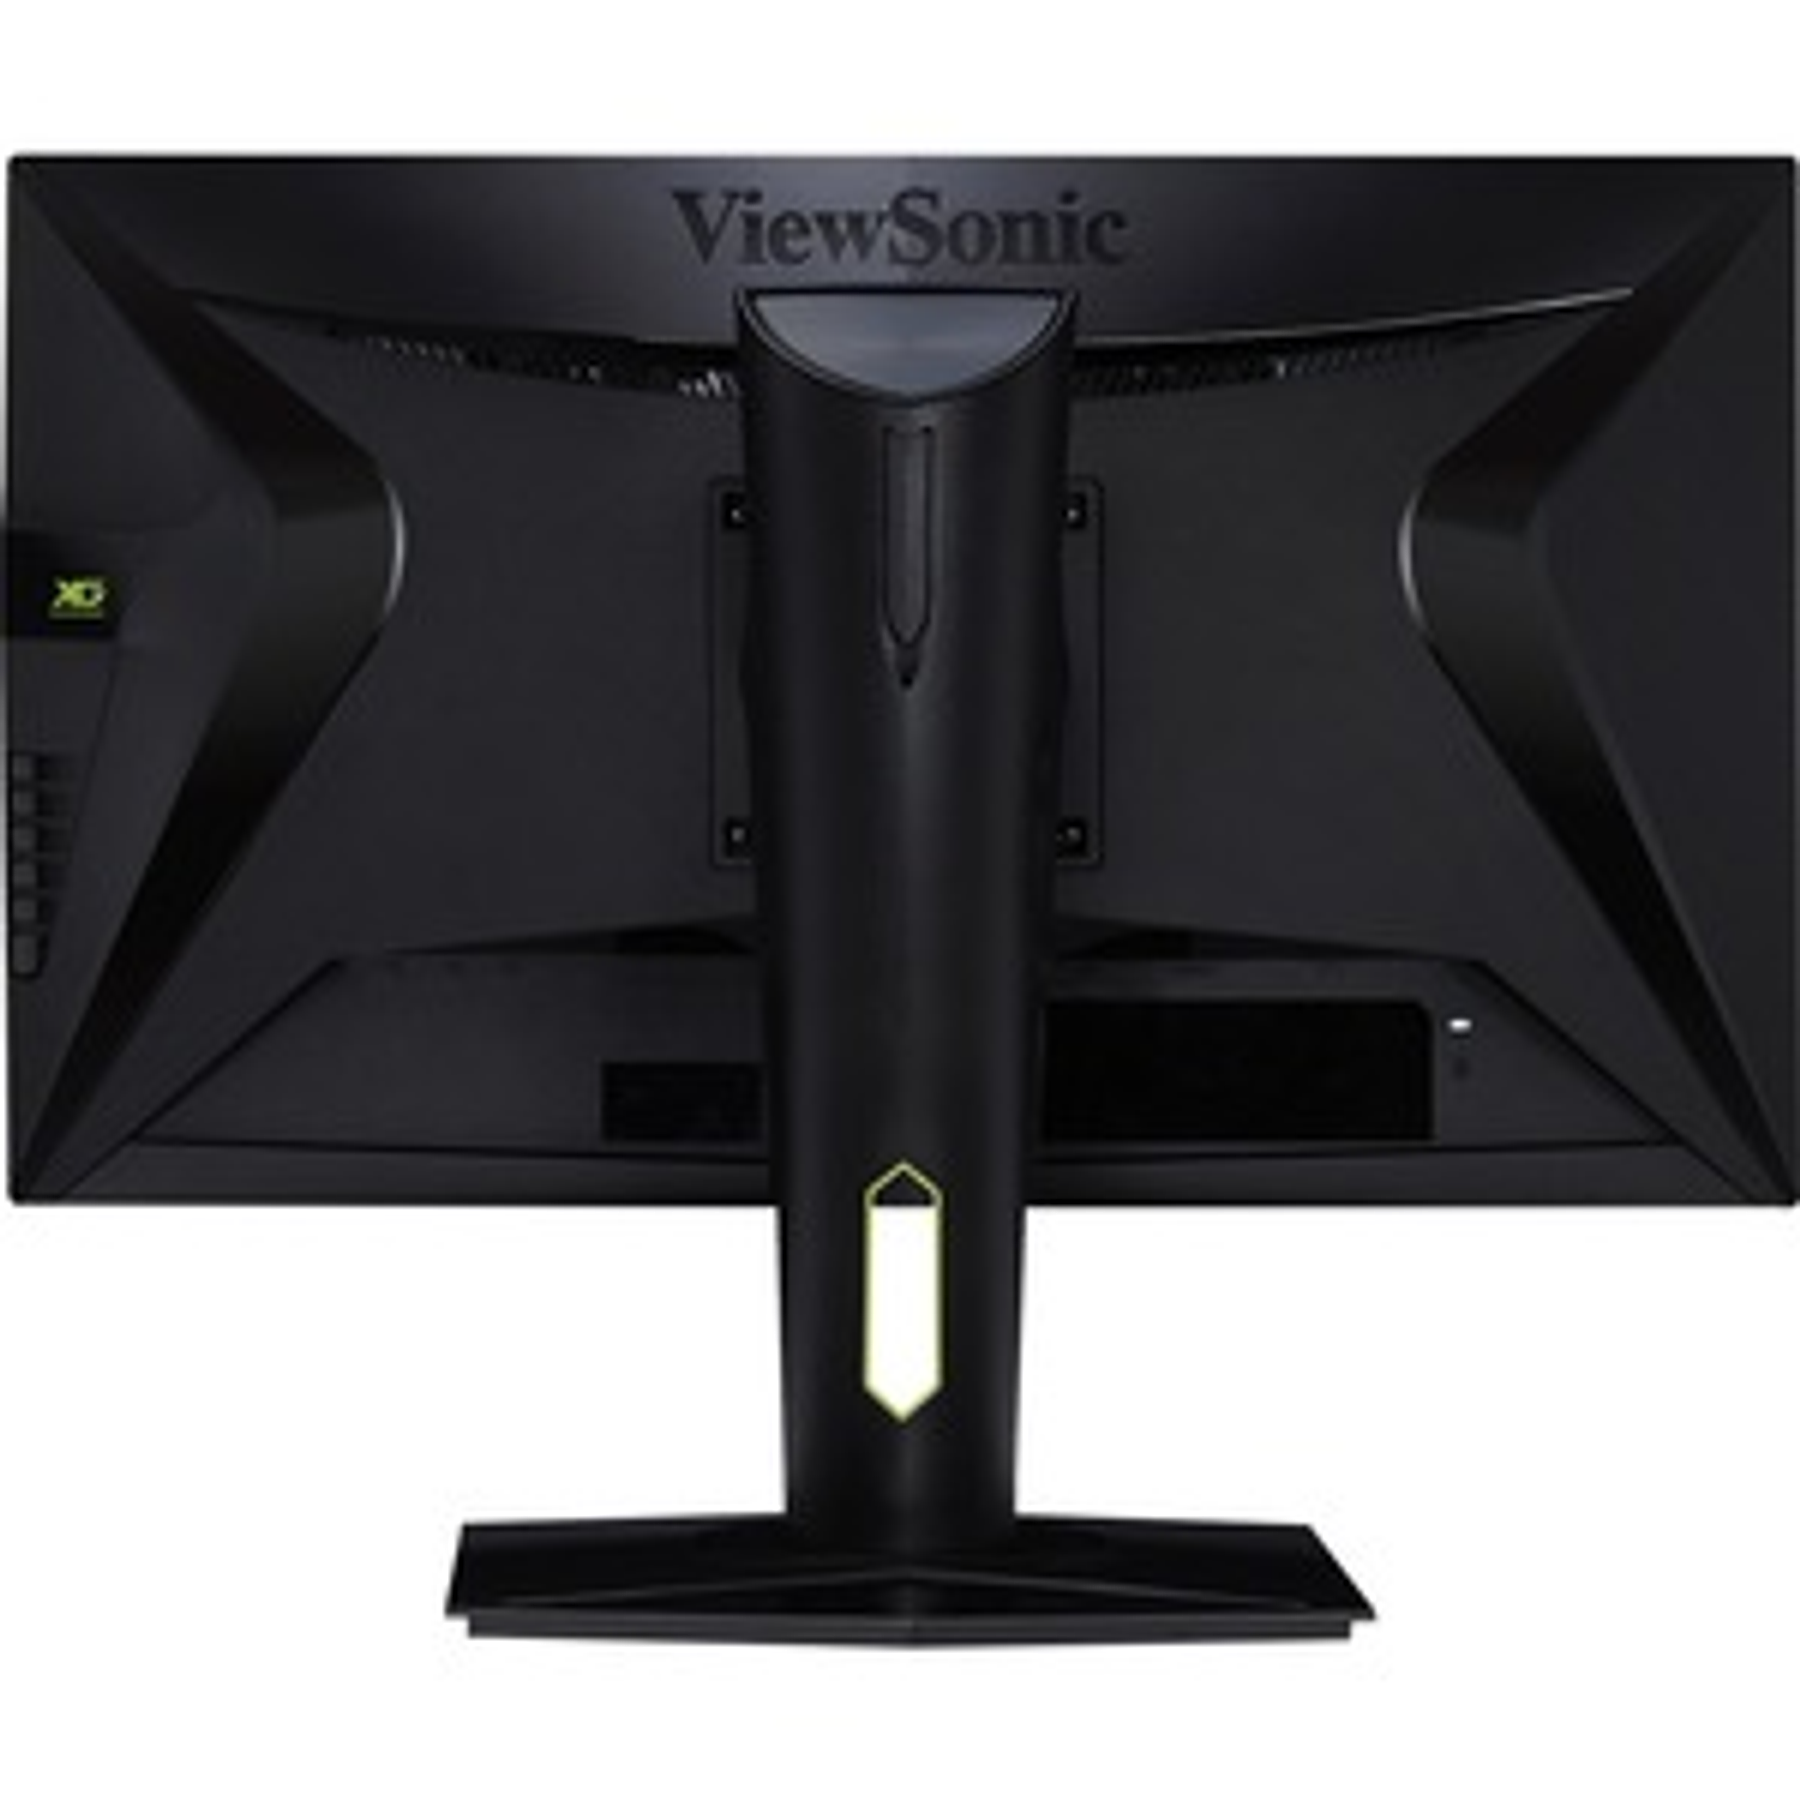  Monitor Gaming Viewsonic 25IN 1920x1080, G-Sync, Dport-HDMI Speaker